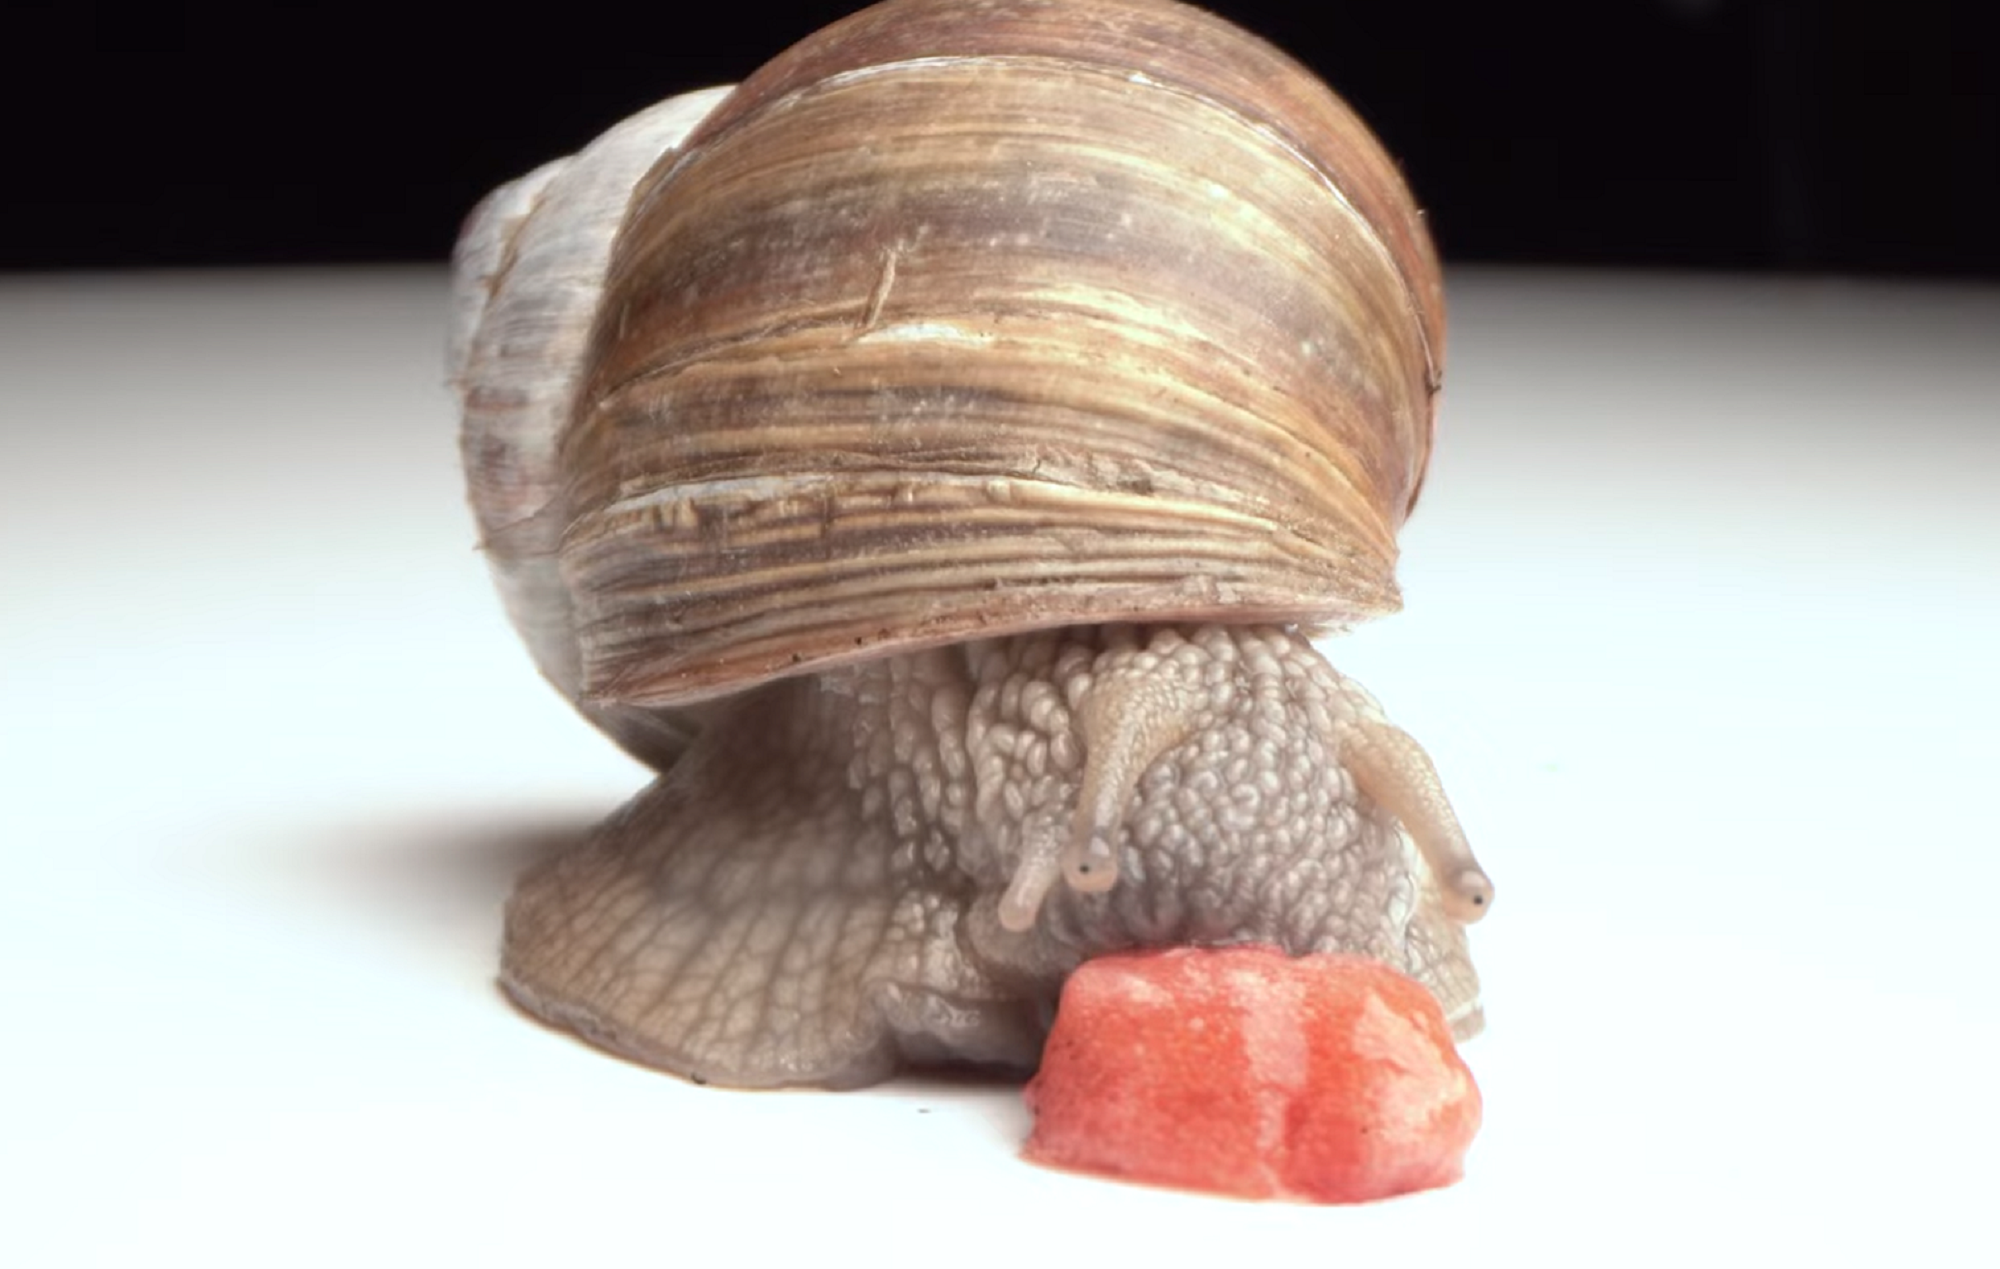 This video of a snail eating fruit will give you nightmares